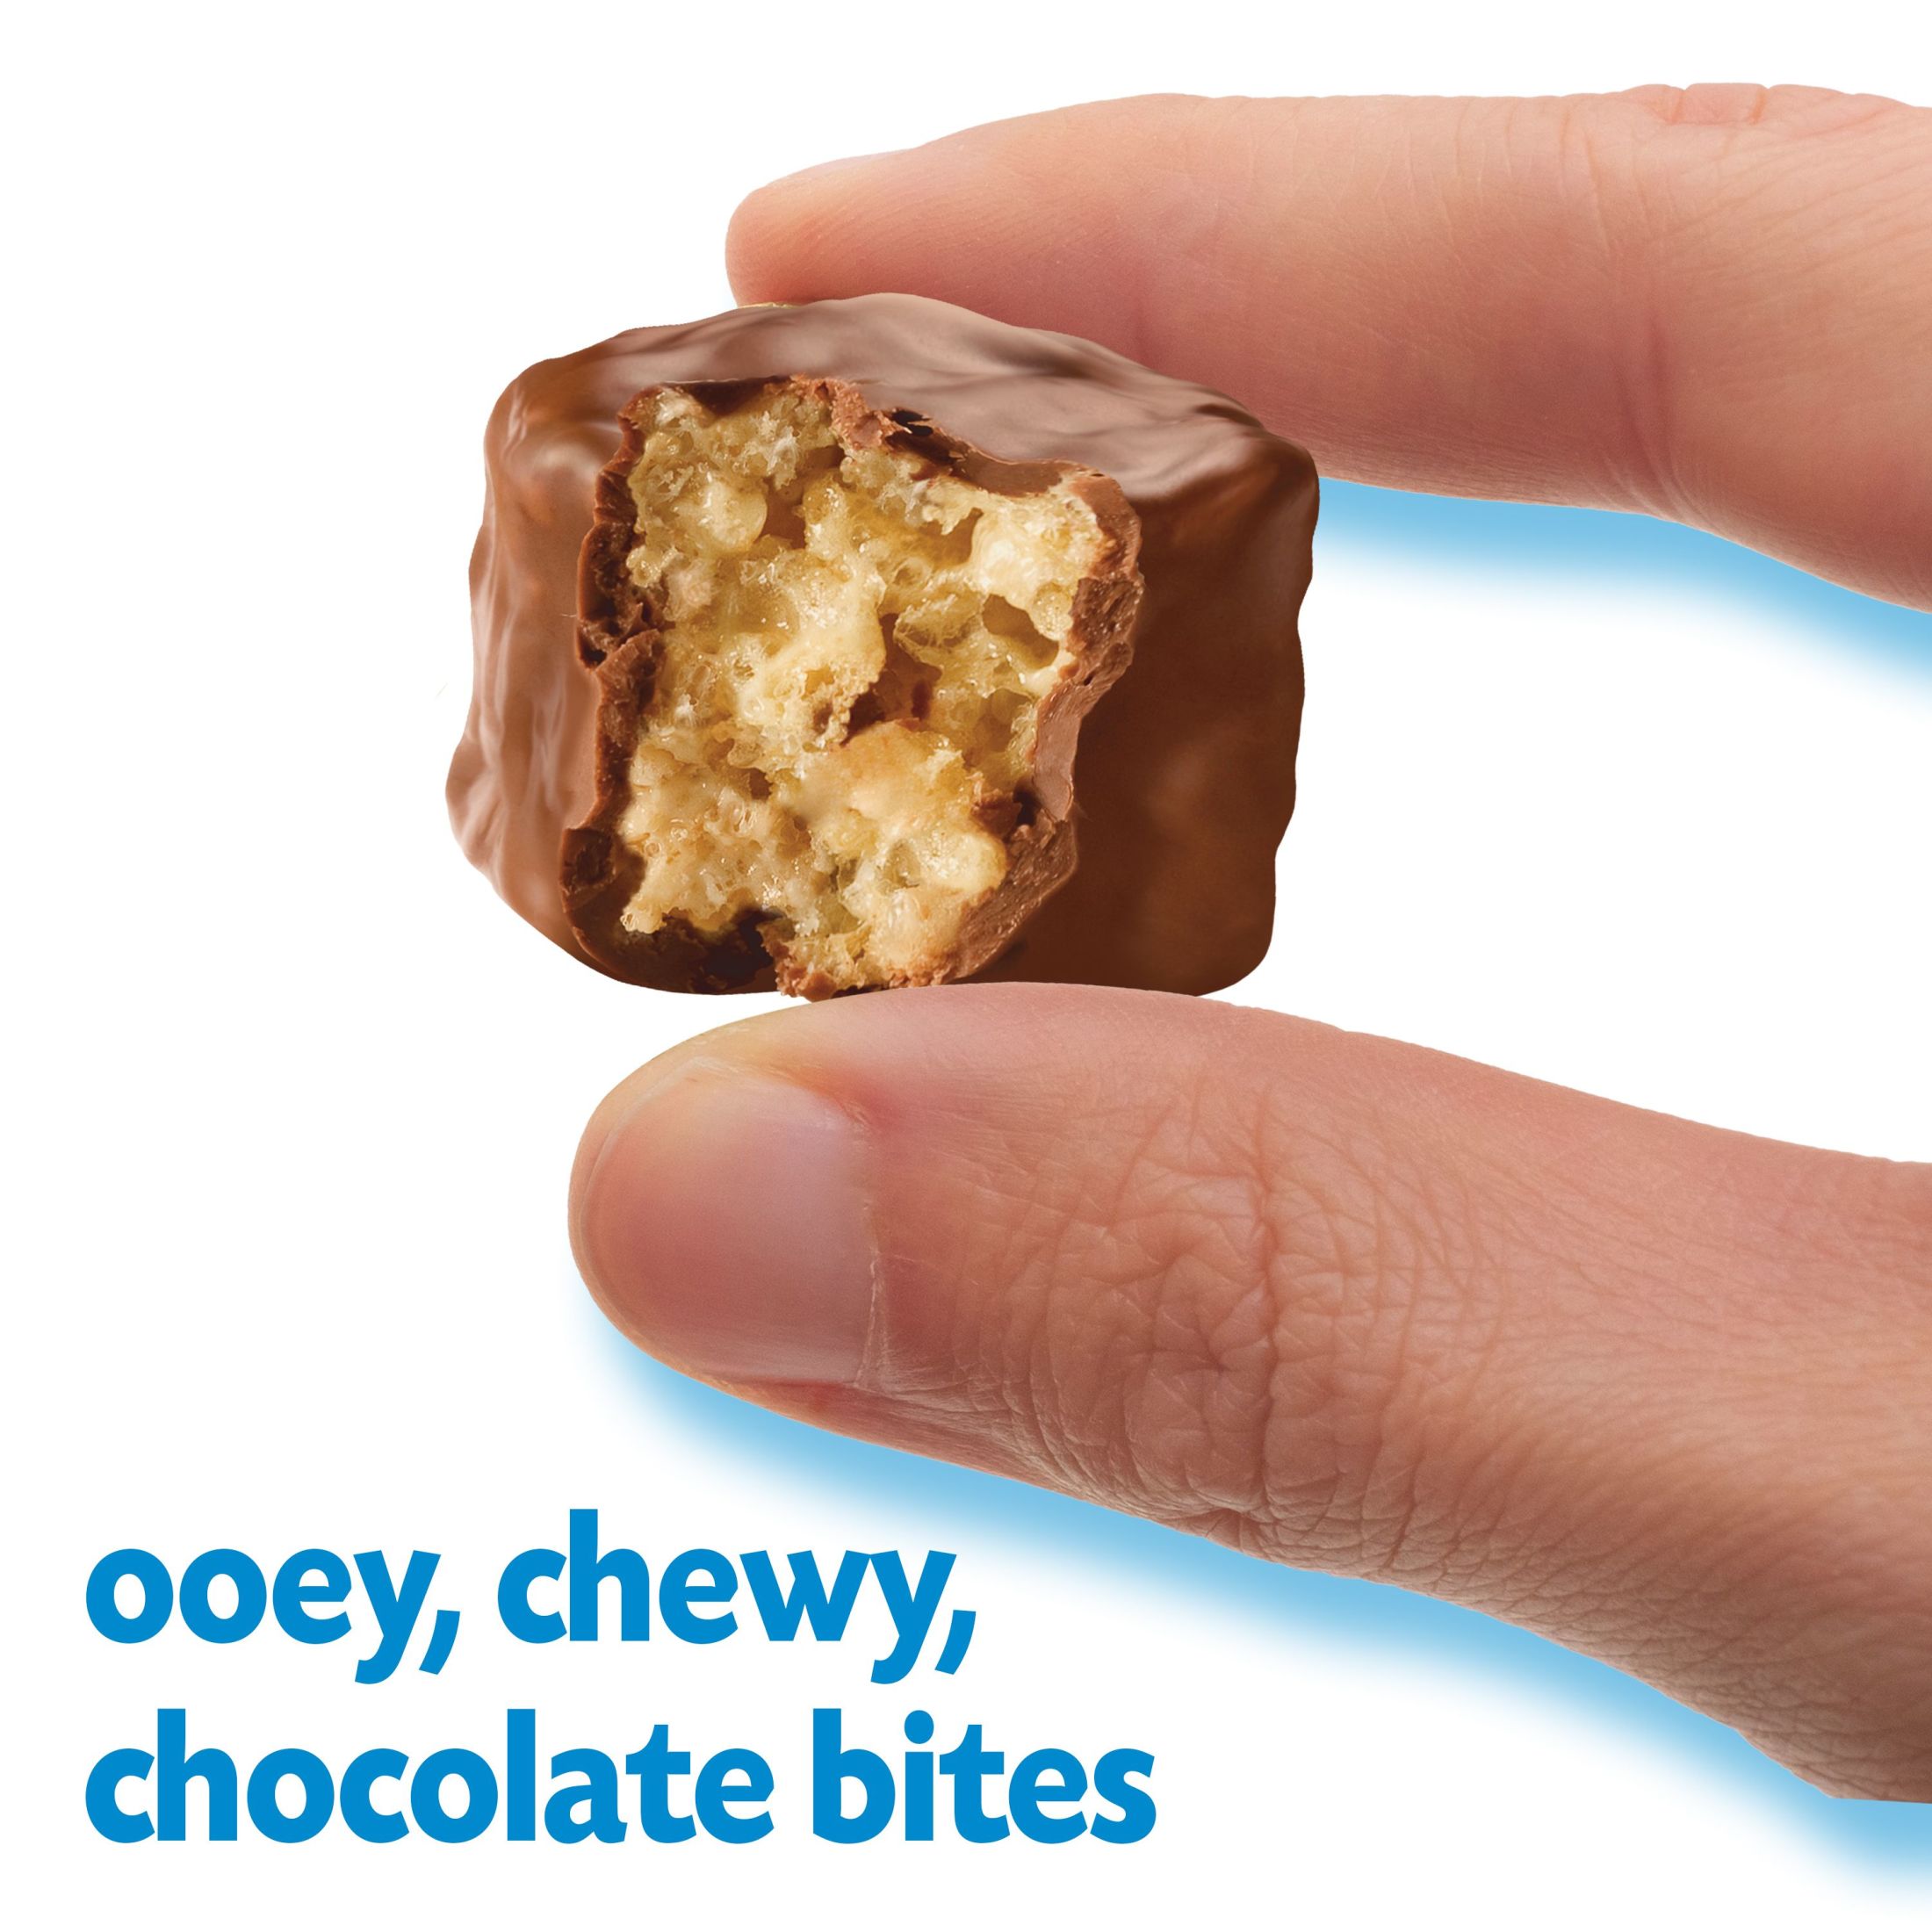 Rice Krispies Treats Poppers Chocolatey Chewy Crispy Marshmallow Squares, 7.1 oz - image 4 of 8